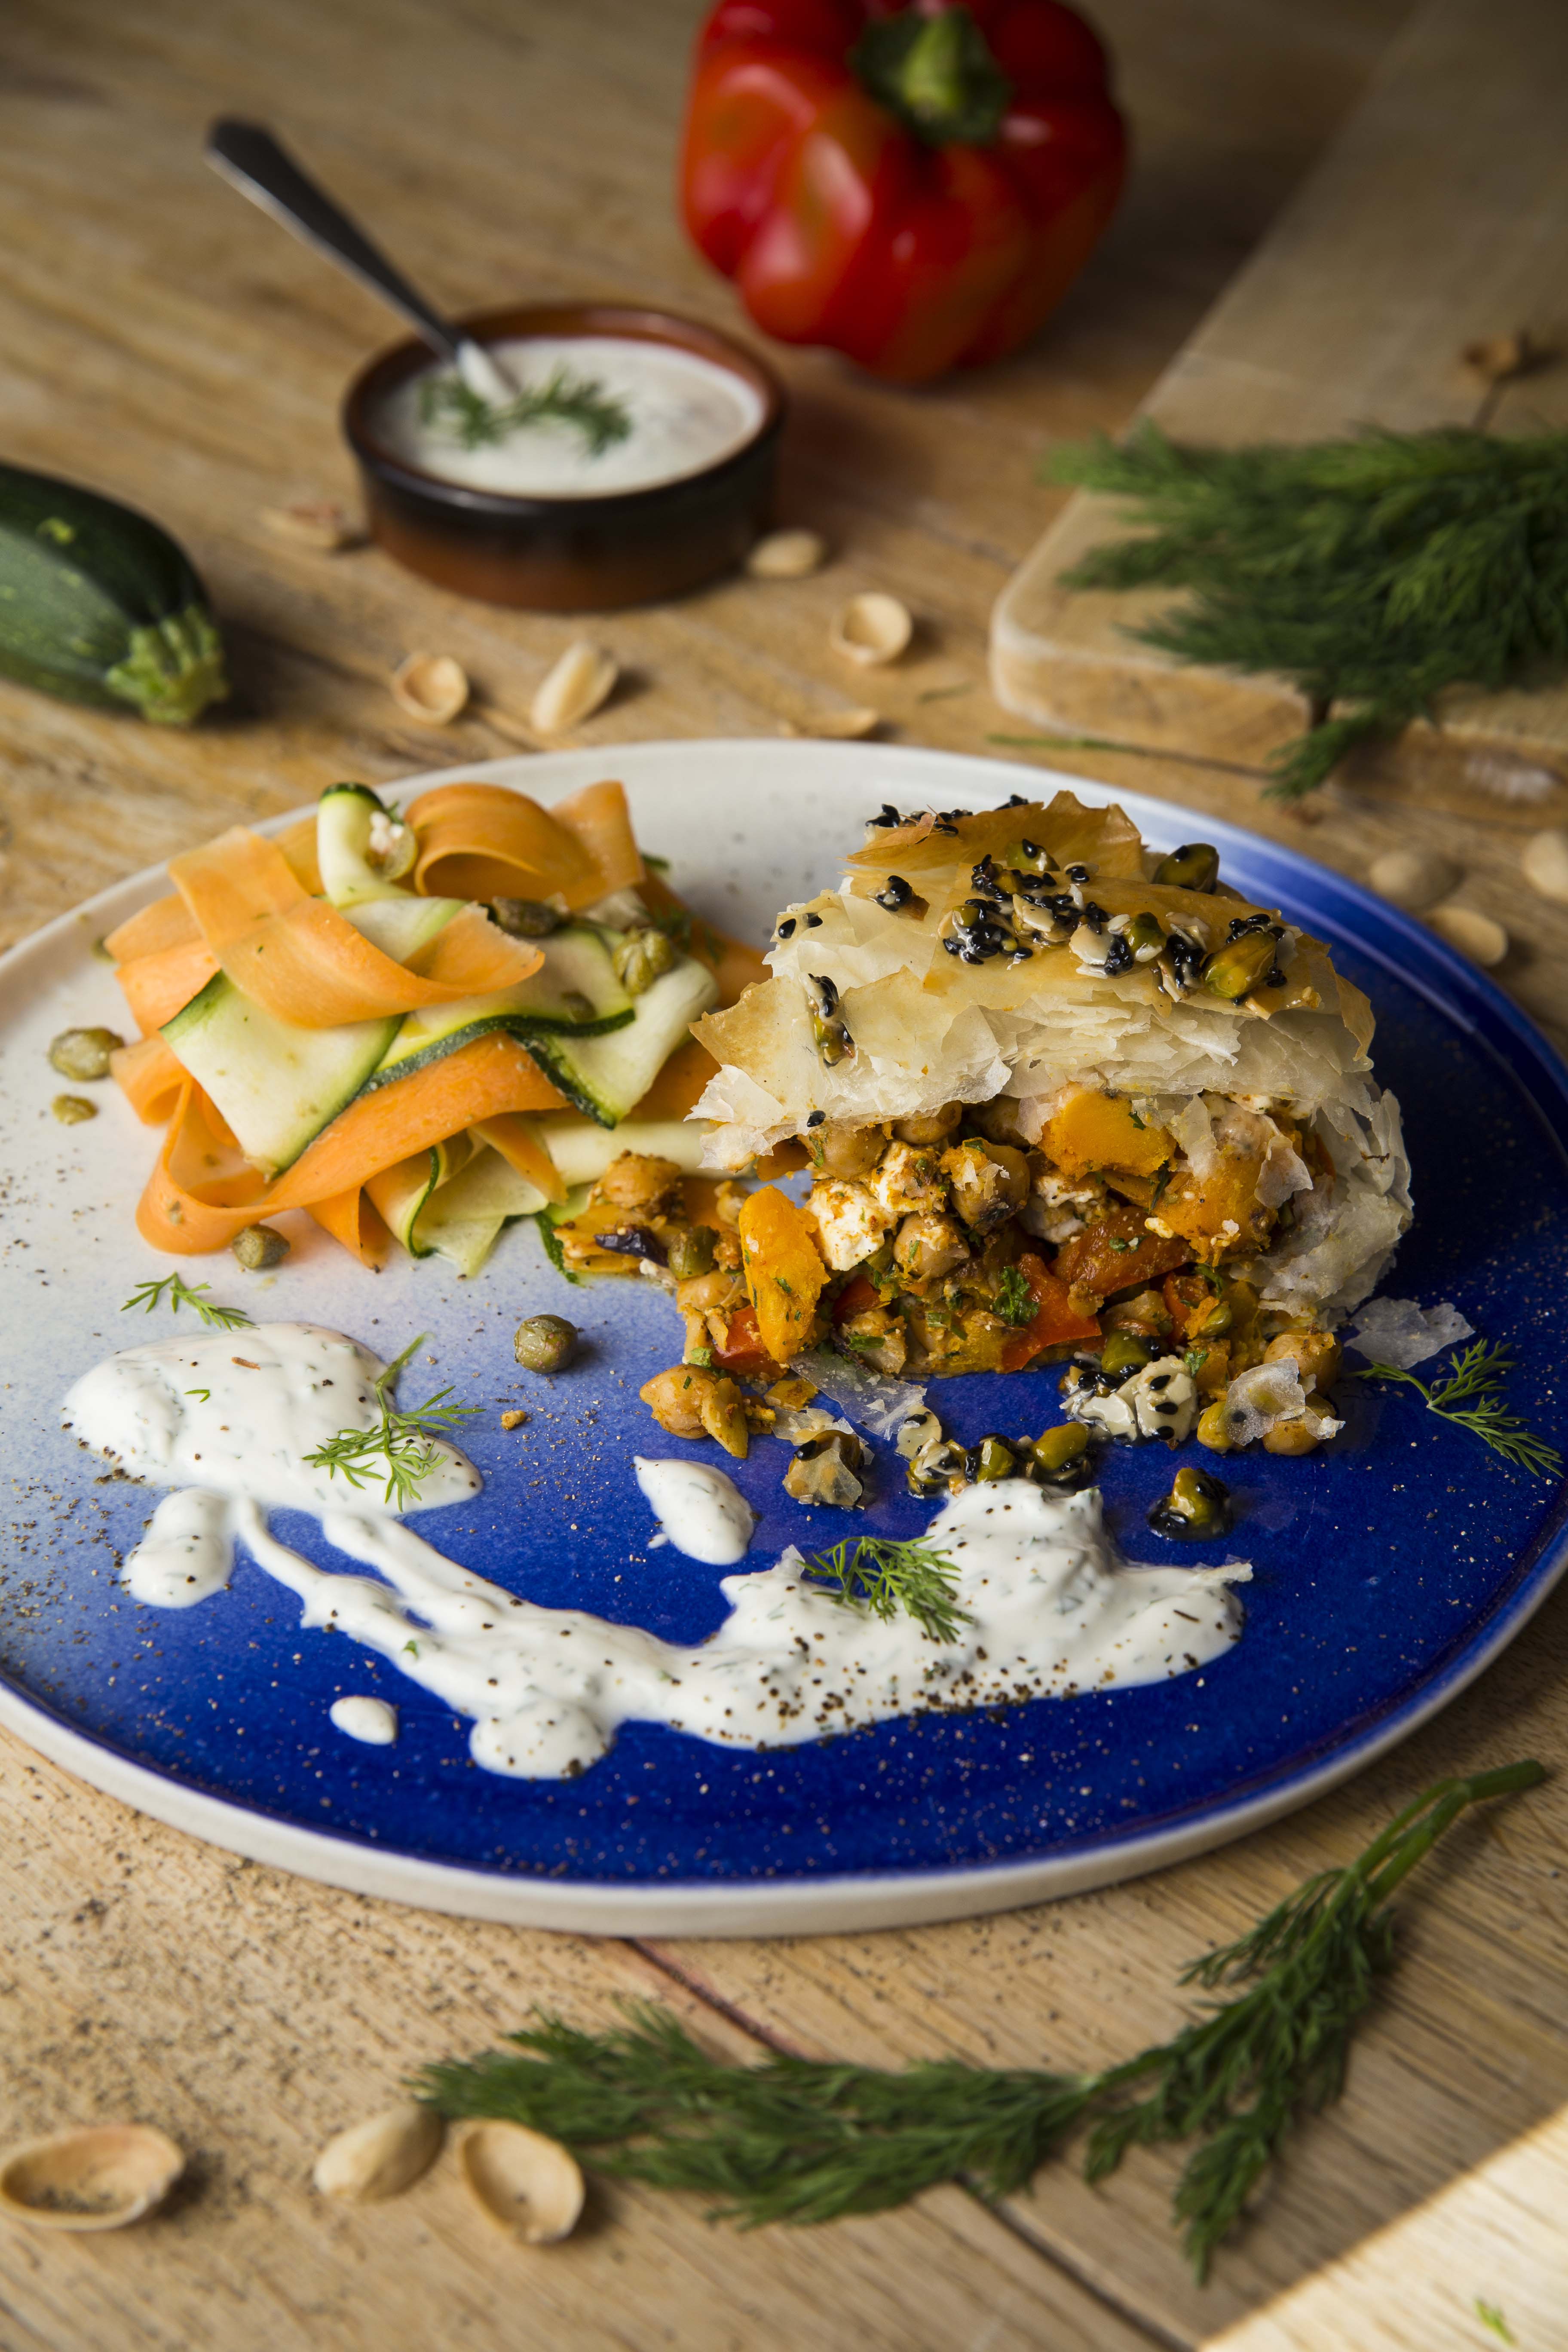 Tuesday : Spiced Vegetable Filo Pie